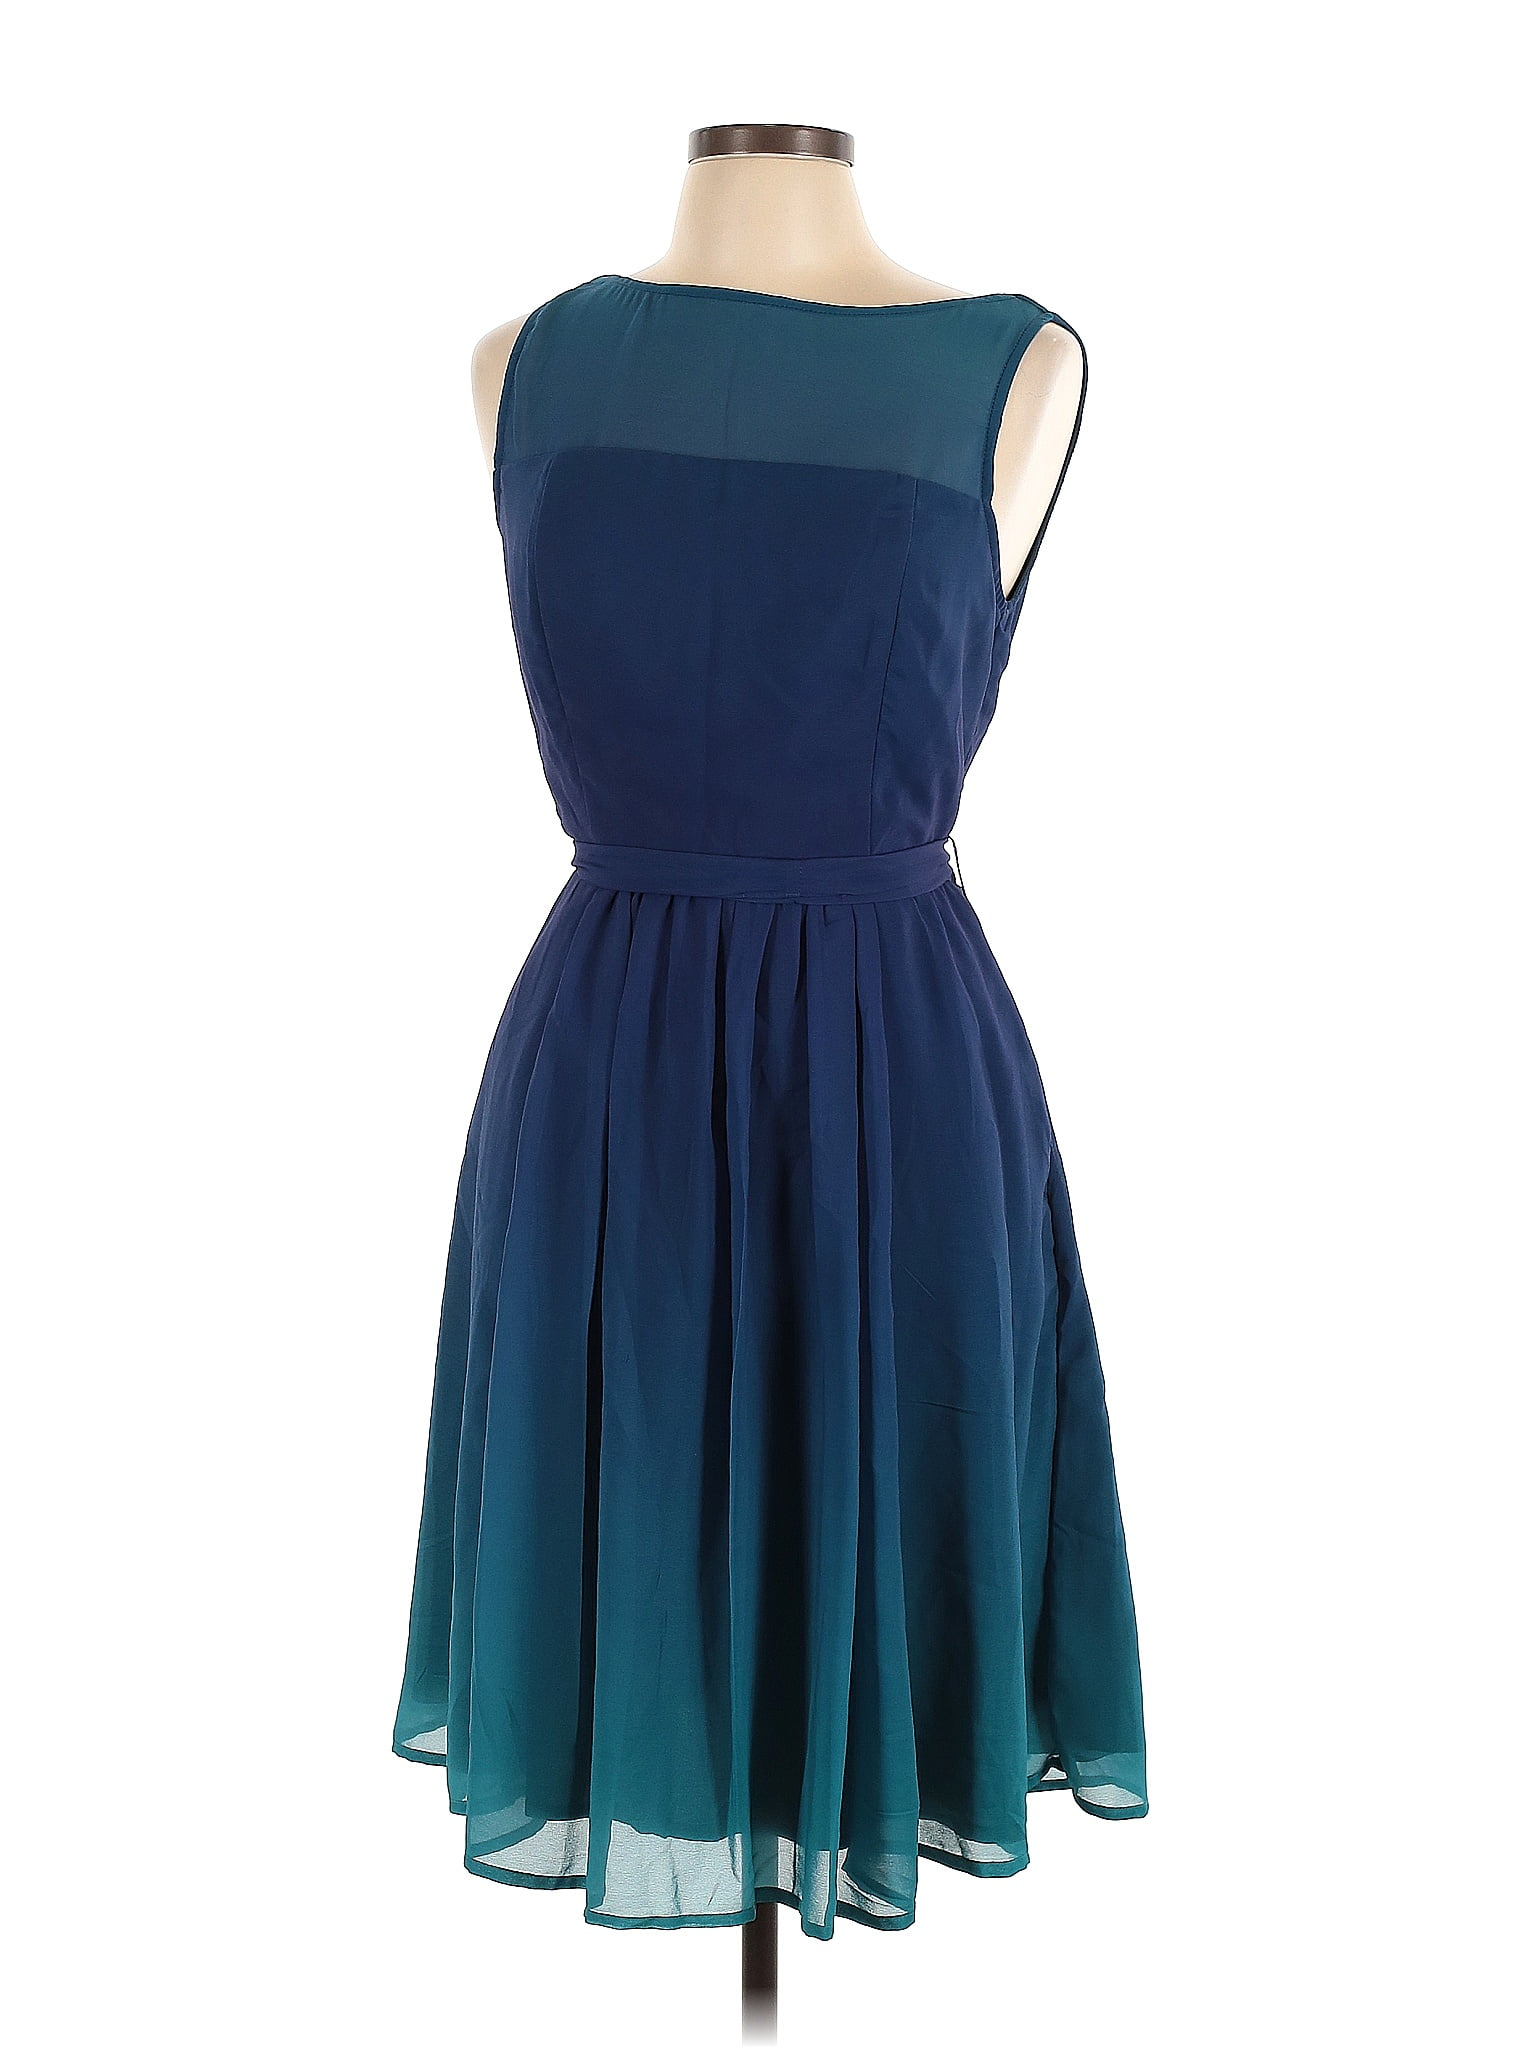 eShakti 100% Polyester Solid Teal Cocktail Dress Size 12 - 60% off ...